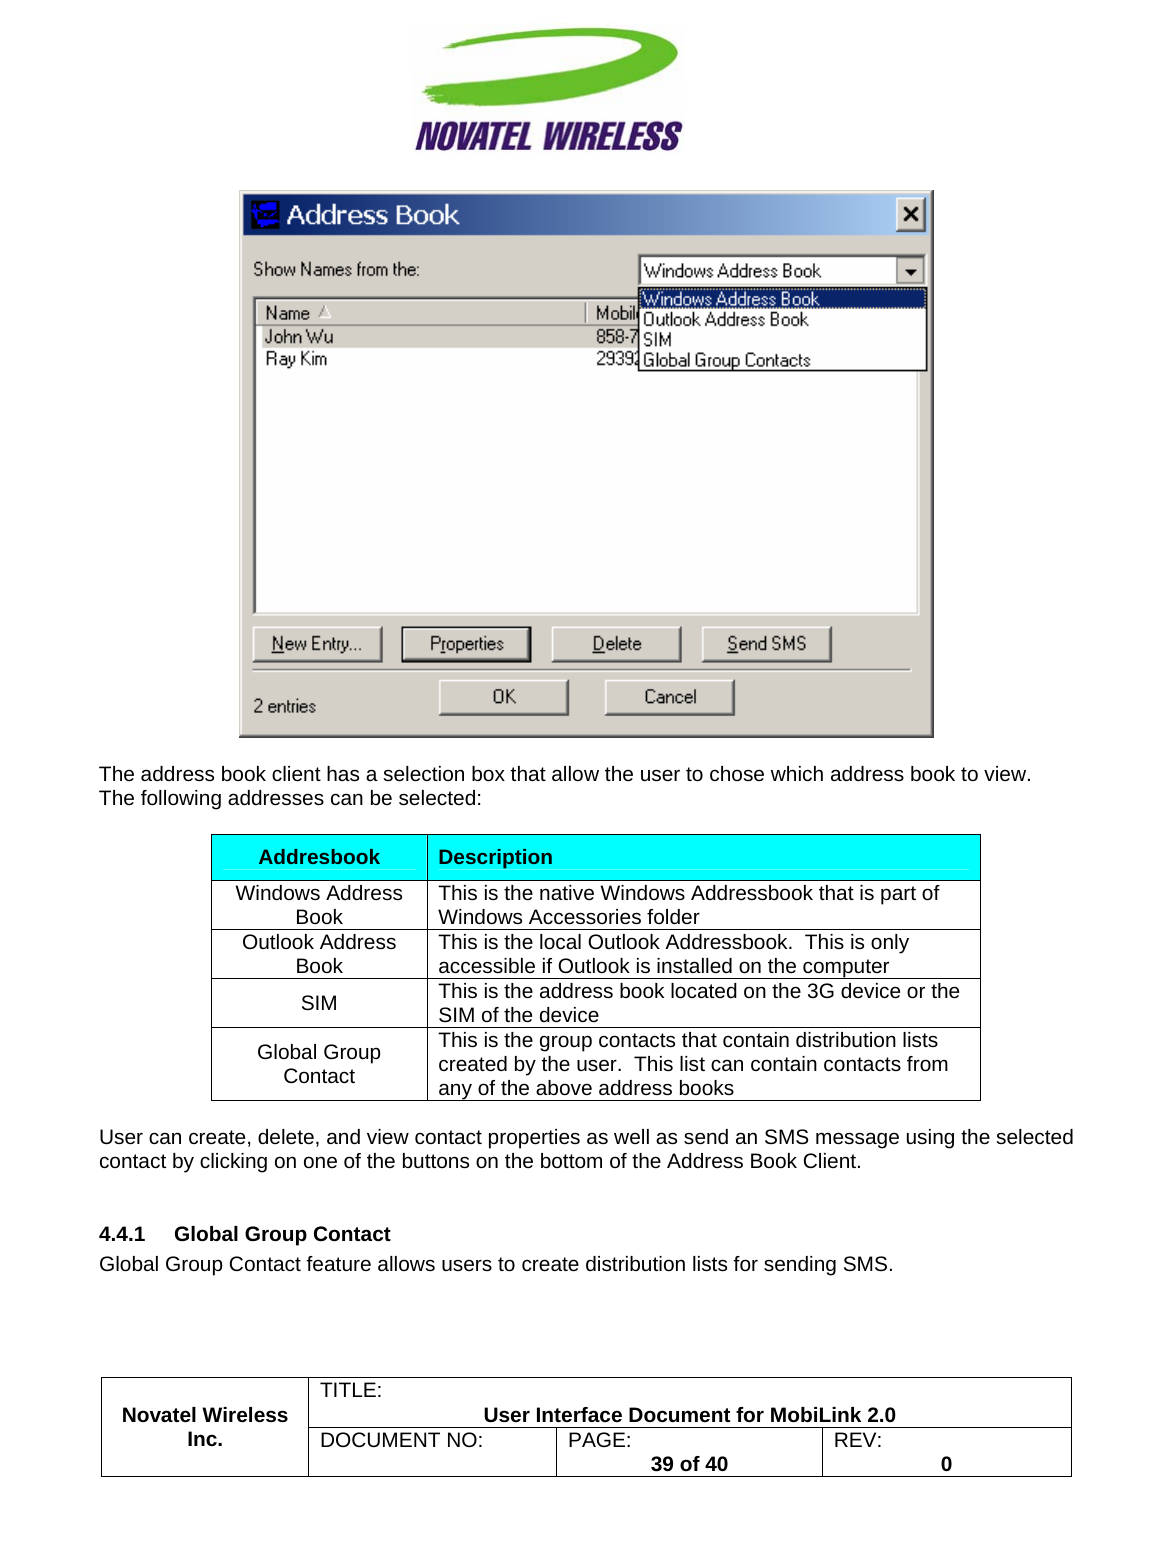                                                         TITLE:  User Interface Document for MobiLink 2.0   The address book client has a selection box that allow the user to chose which address book to view.  The following addresses can be selected:  Addresbook  Description Windows Address Book  This is the native Windows Addressbook that is part of Windows Accessories folder Outlook Address Book  This is the local Outlook Addressbook.  This is only accessible if Outlook is installed on the computer SIM  This is the address book located on the 3G device or the SIM of the device Global Group Contact This is the group contacts that contain distribution lists created by the user.  This list can contain contacts from any of the above address books  User can create, delete, and view contact properties as well as send an SMS message using the selected contact by clicking on one of the buttons on the bottom of the Address Book Client.  4.4.1  Global Group Contact Novatel Wireless  Inc. DOCUMENT NO:  PAGE:   39 of 40  REV:  0   Global Group Contact feature allows users to create distribution lists for sending SMS. 